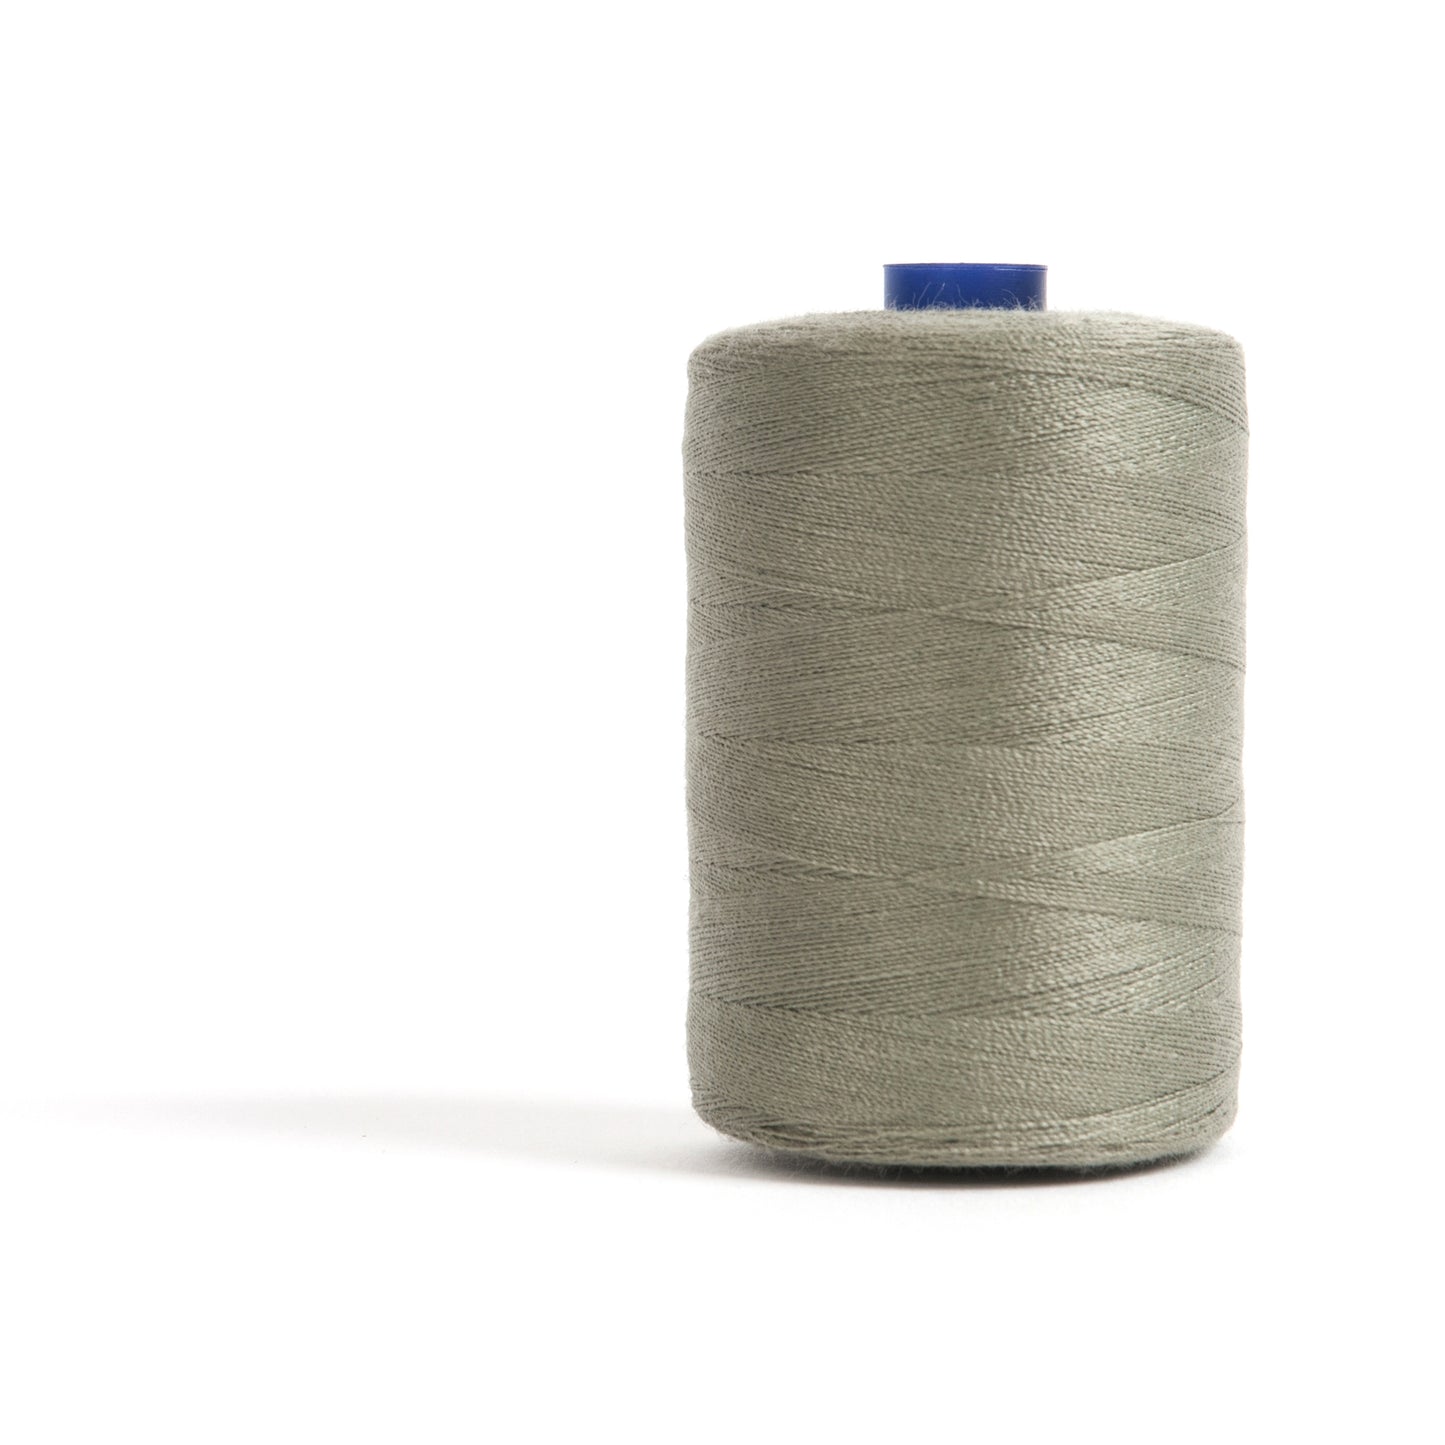 Sewing and Overlocking Thread: 1,000m: Olive